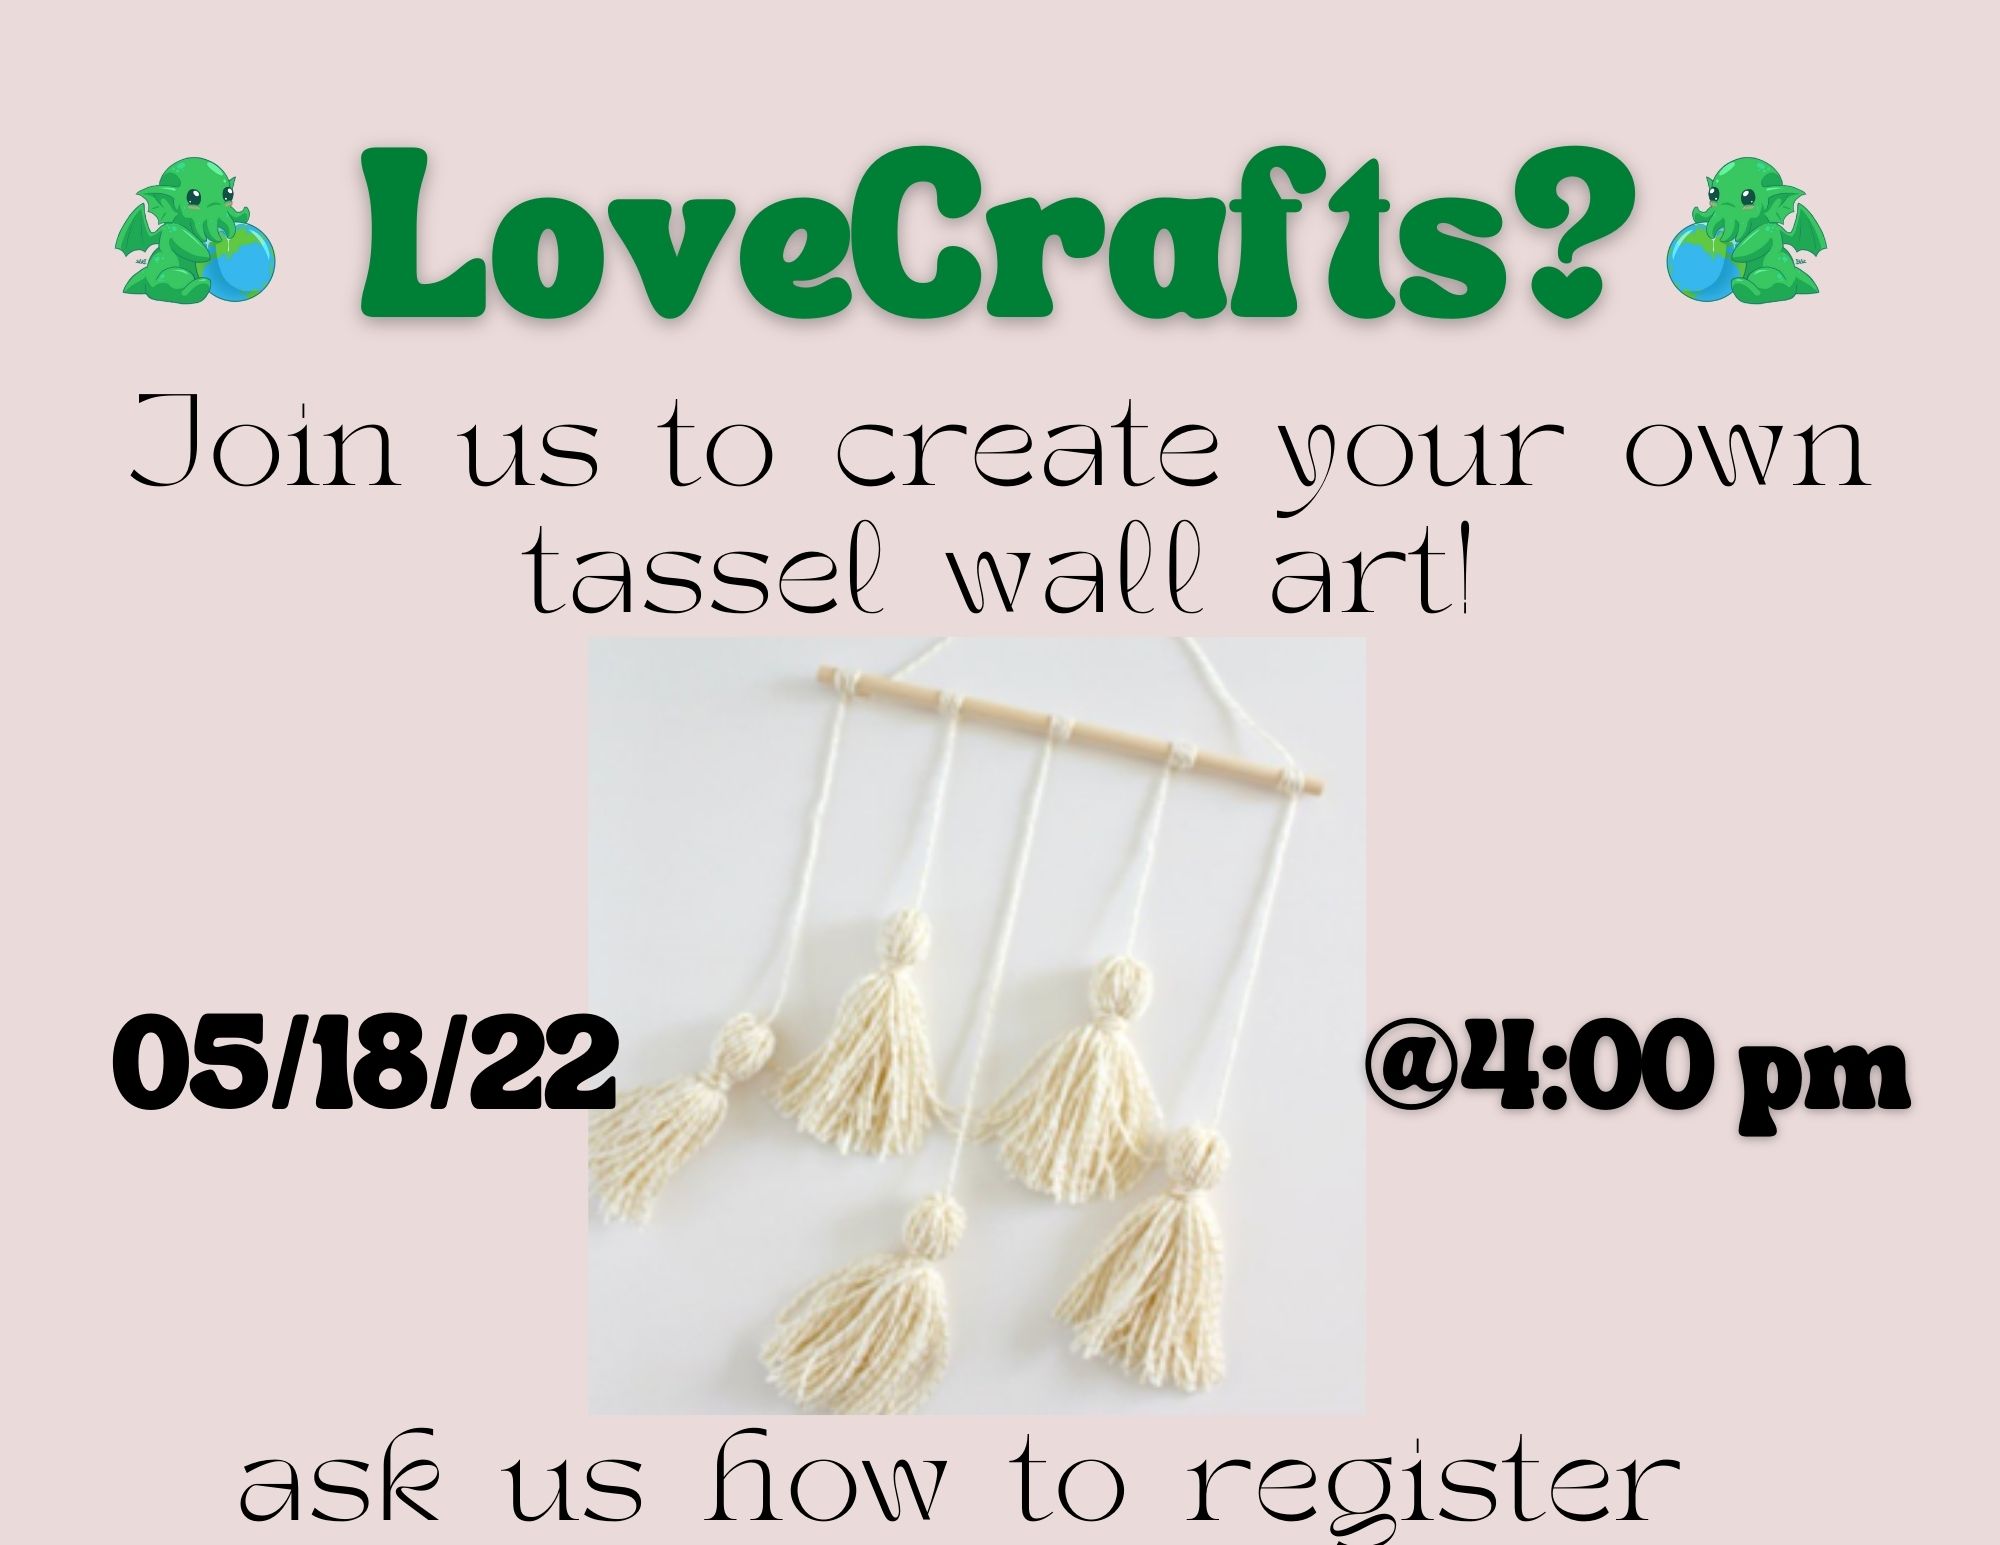 Love Crafts? Join us this May 18th to create your own Tassel Wall Art!